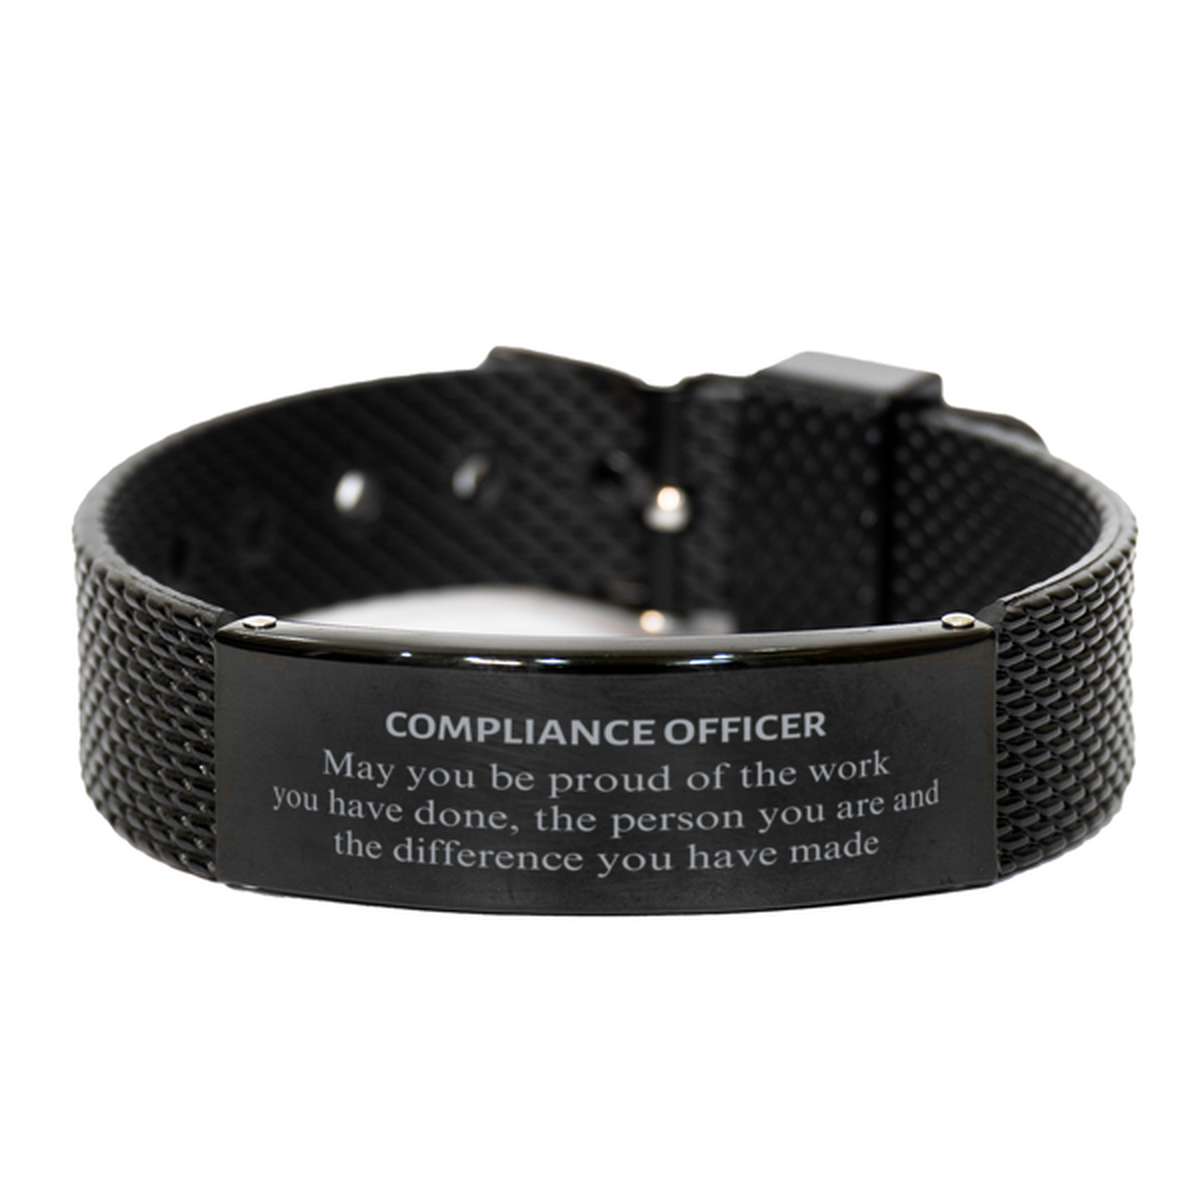 Compliance Officer May you be proud of the work you have done, Retirement Compliance Officer Black Shark Mesh Bracelet for Colleague Appreciation Gifts Amazing for Compliance Officer